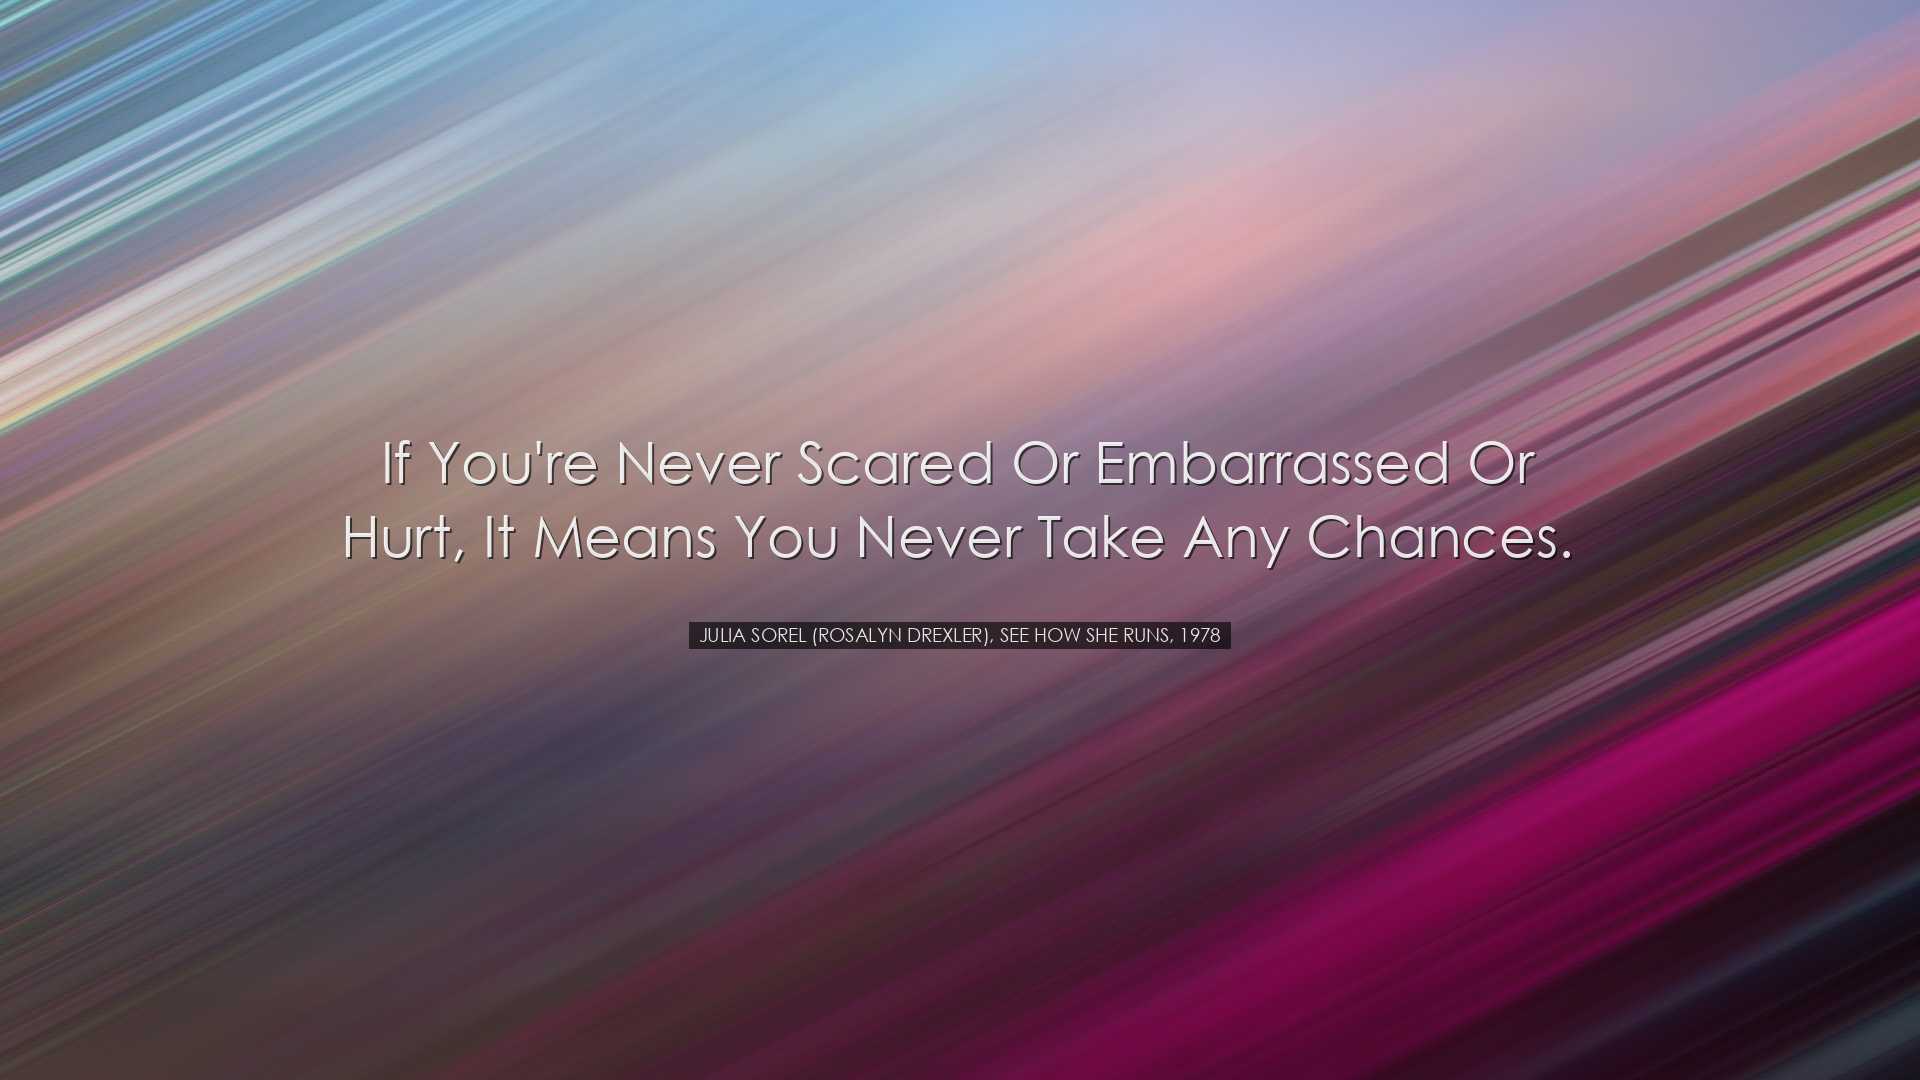 If you're never scared or embarrassed or hurt, it means you never